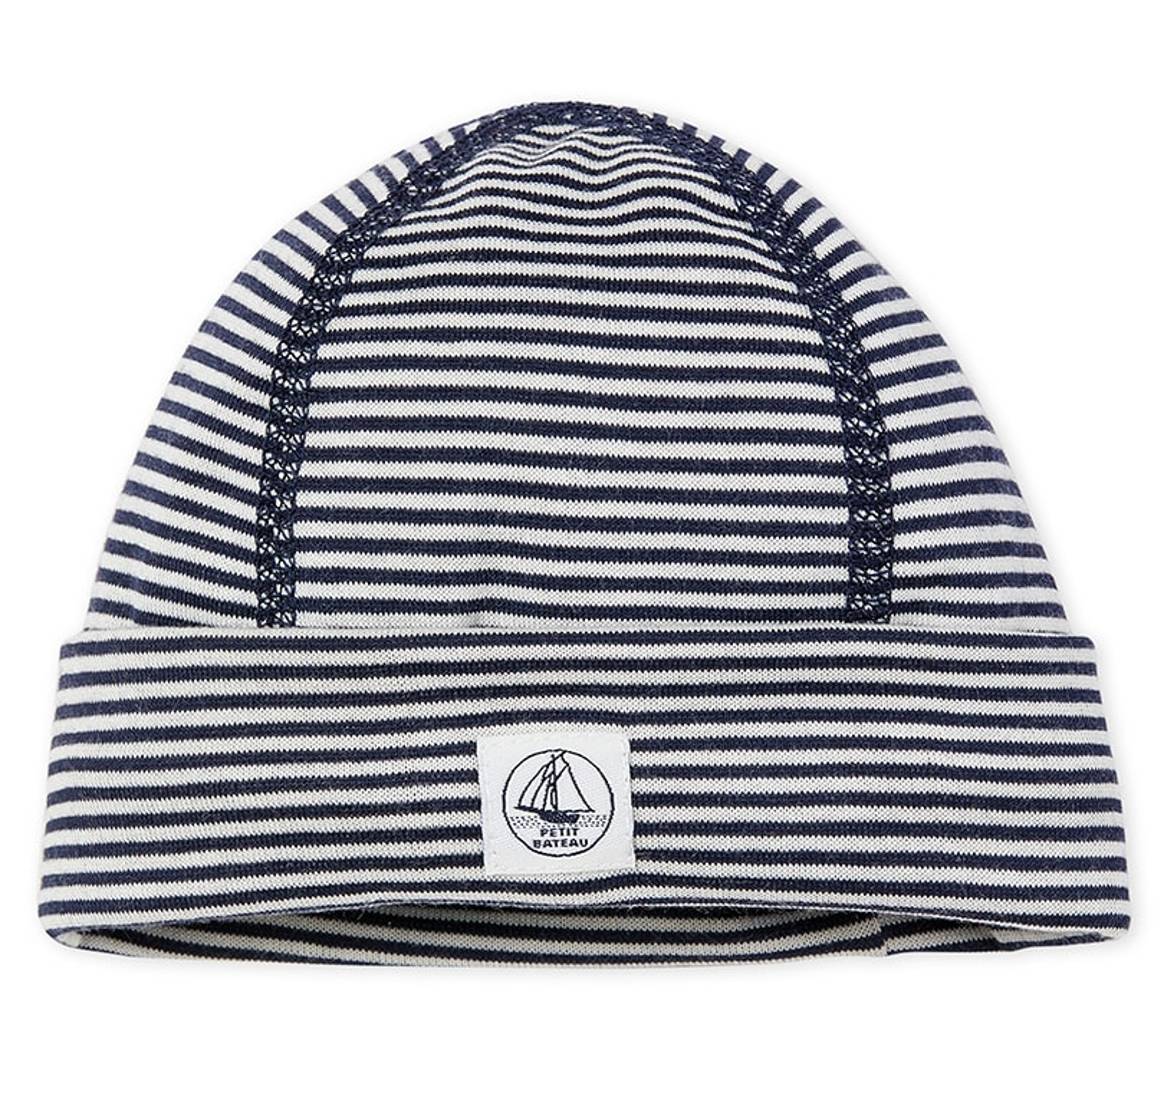 Petit Bateau launches “superknit” to protect babies